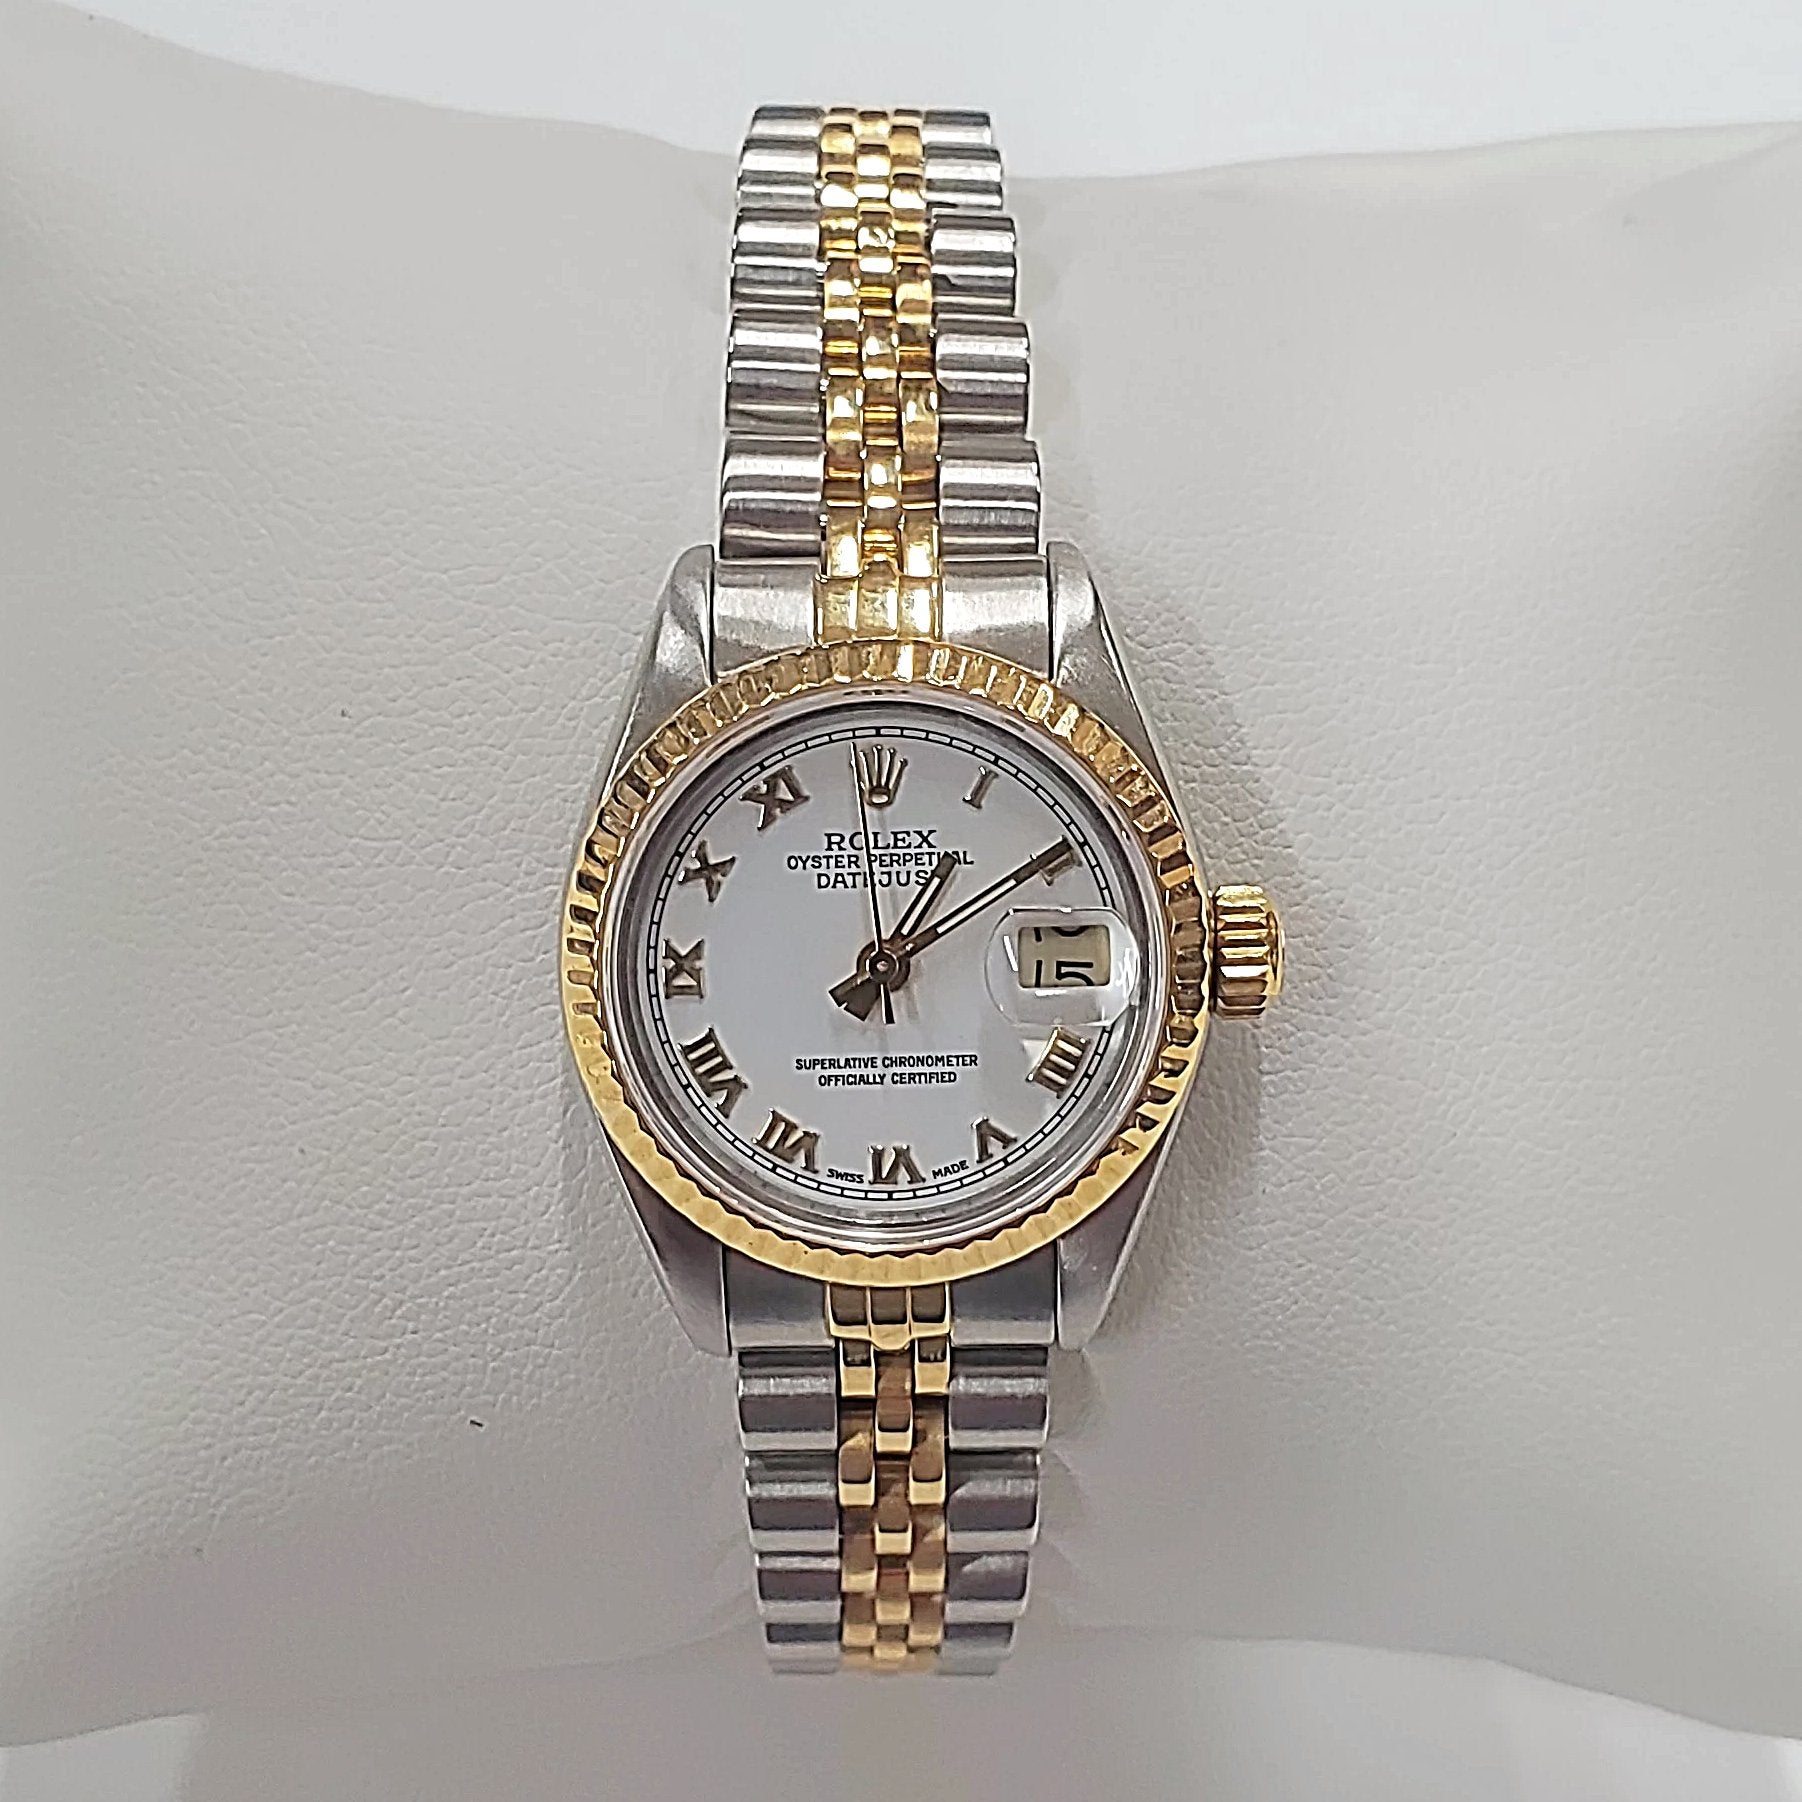 Ladies Rolex 18K Gold 26mm Two Tone DateJust Watch with Fluted Bezel, White Dial and Roman Numerals. (Pre-Owned)